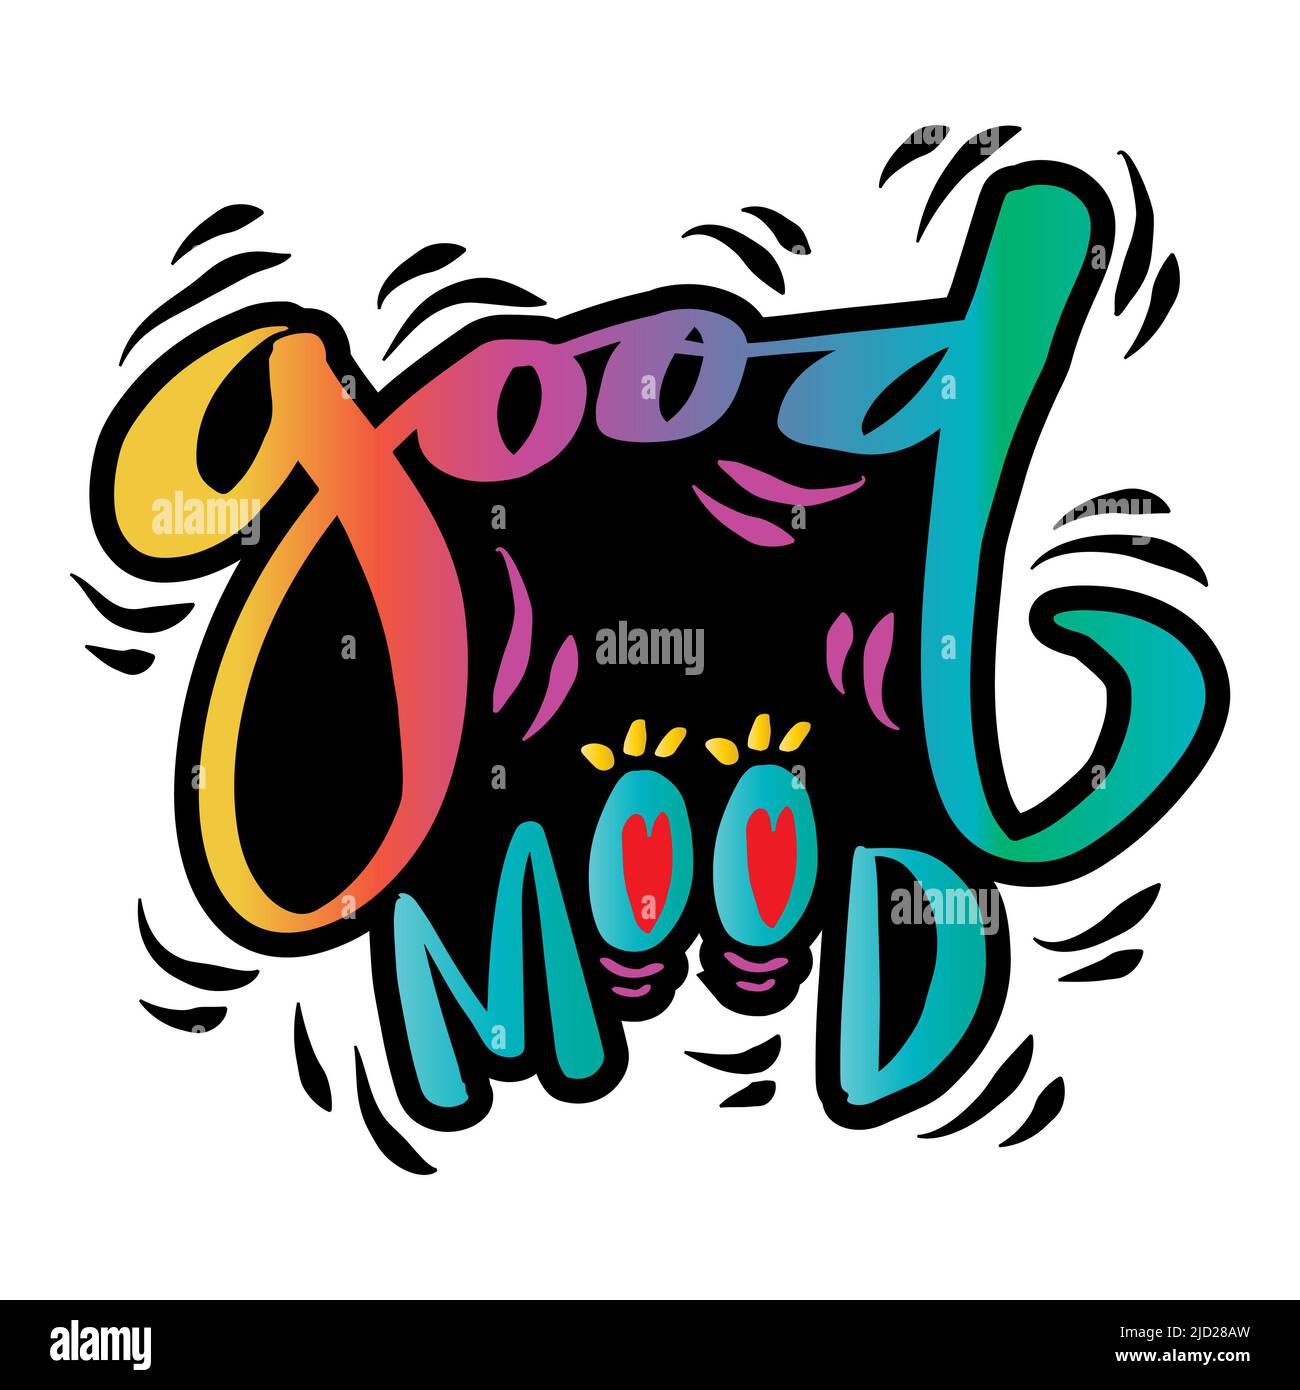 Good mood hand lettering poster Stock Photo